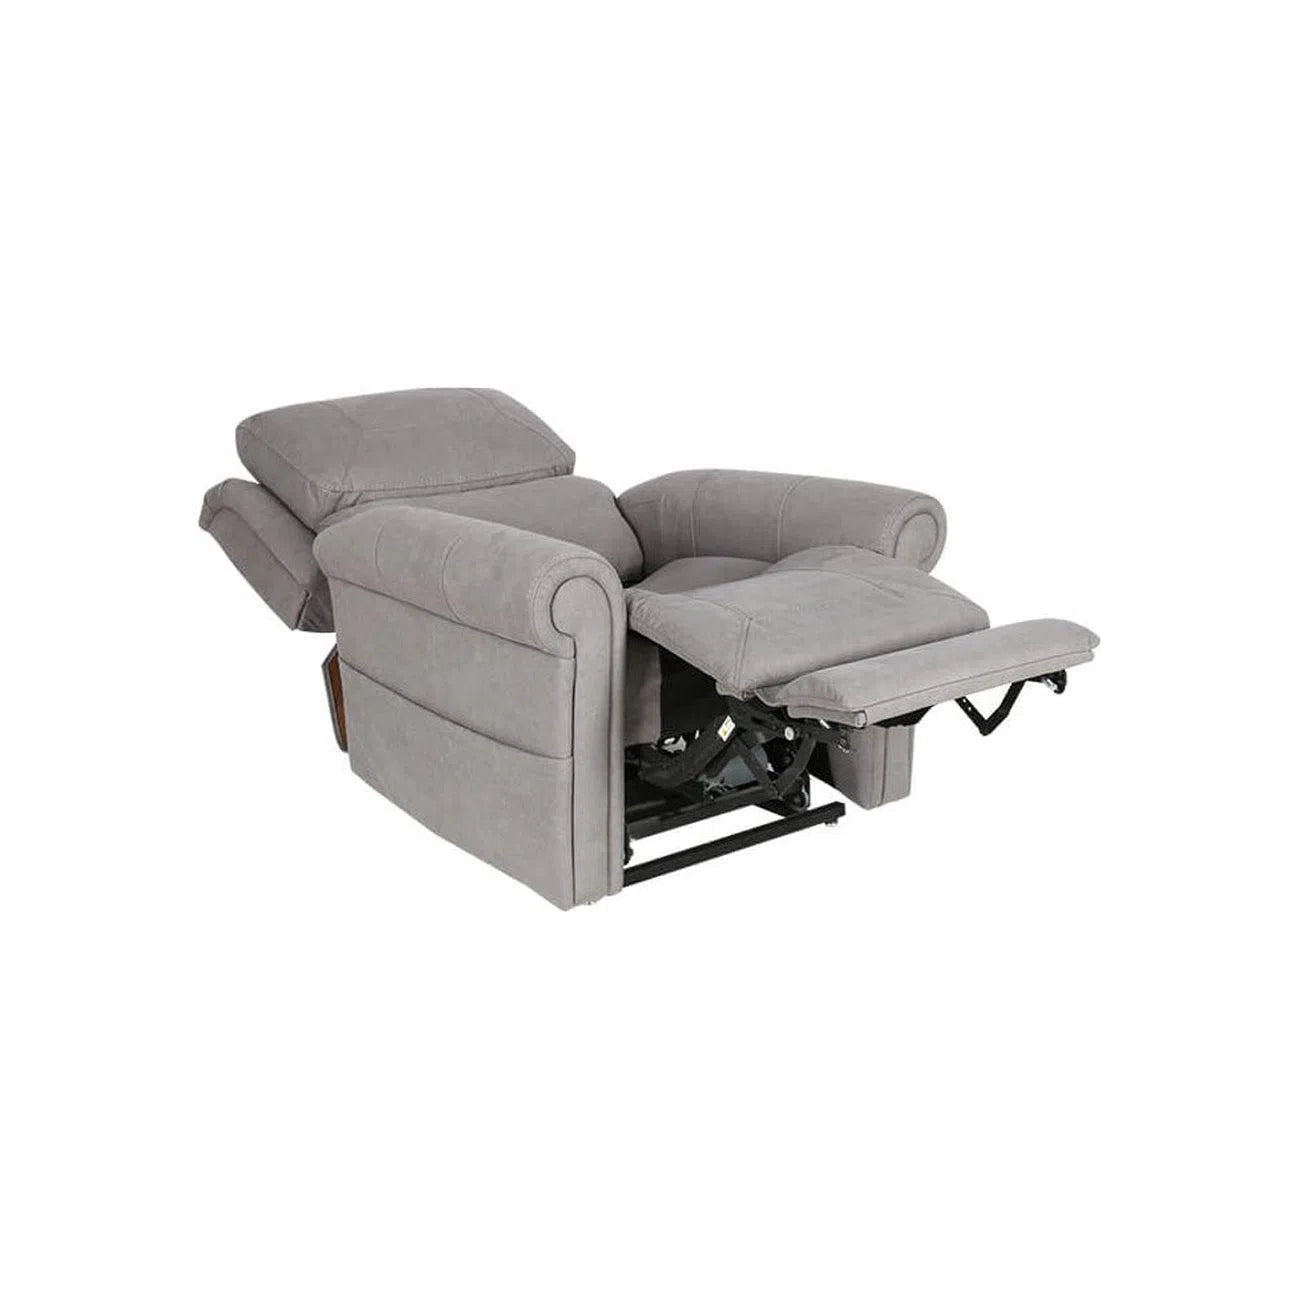 Studio Dual Lift Chair 158kg Limit Chair with Headrest and Lumbar Support-Sleep Doctor